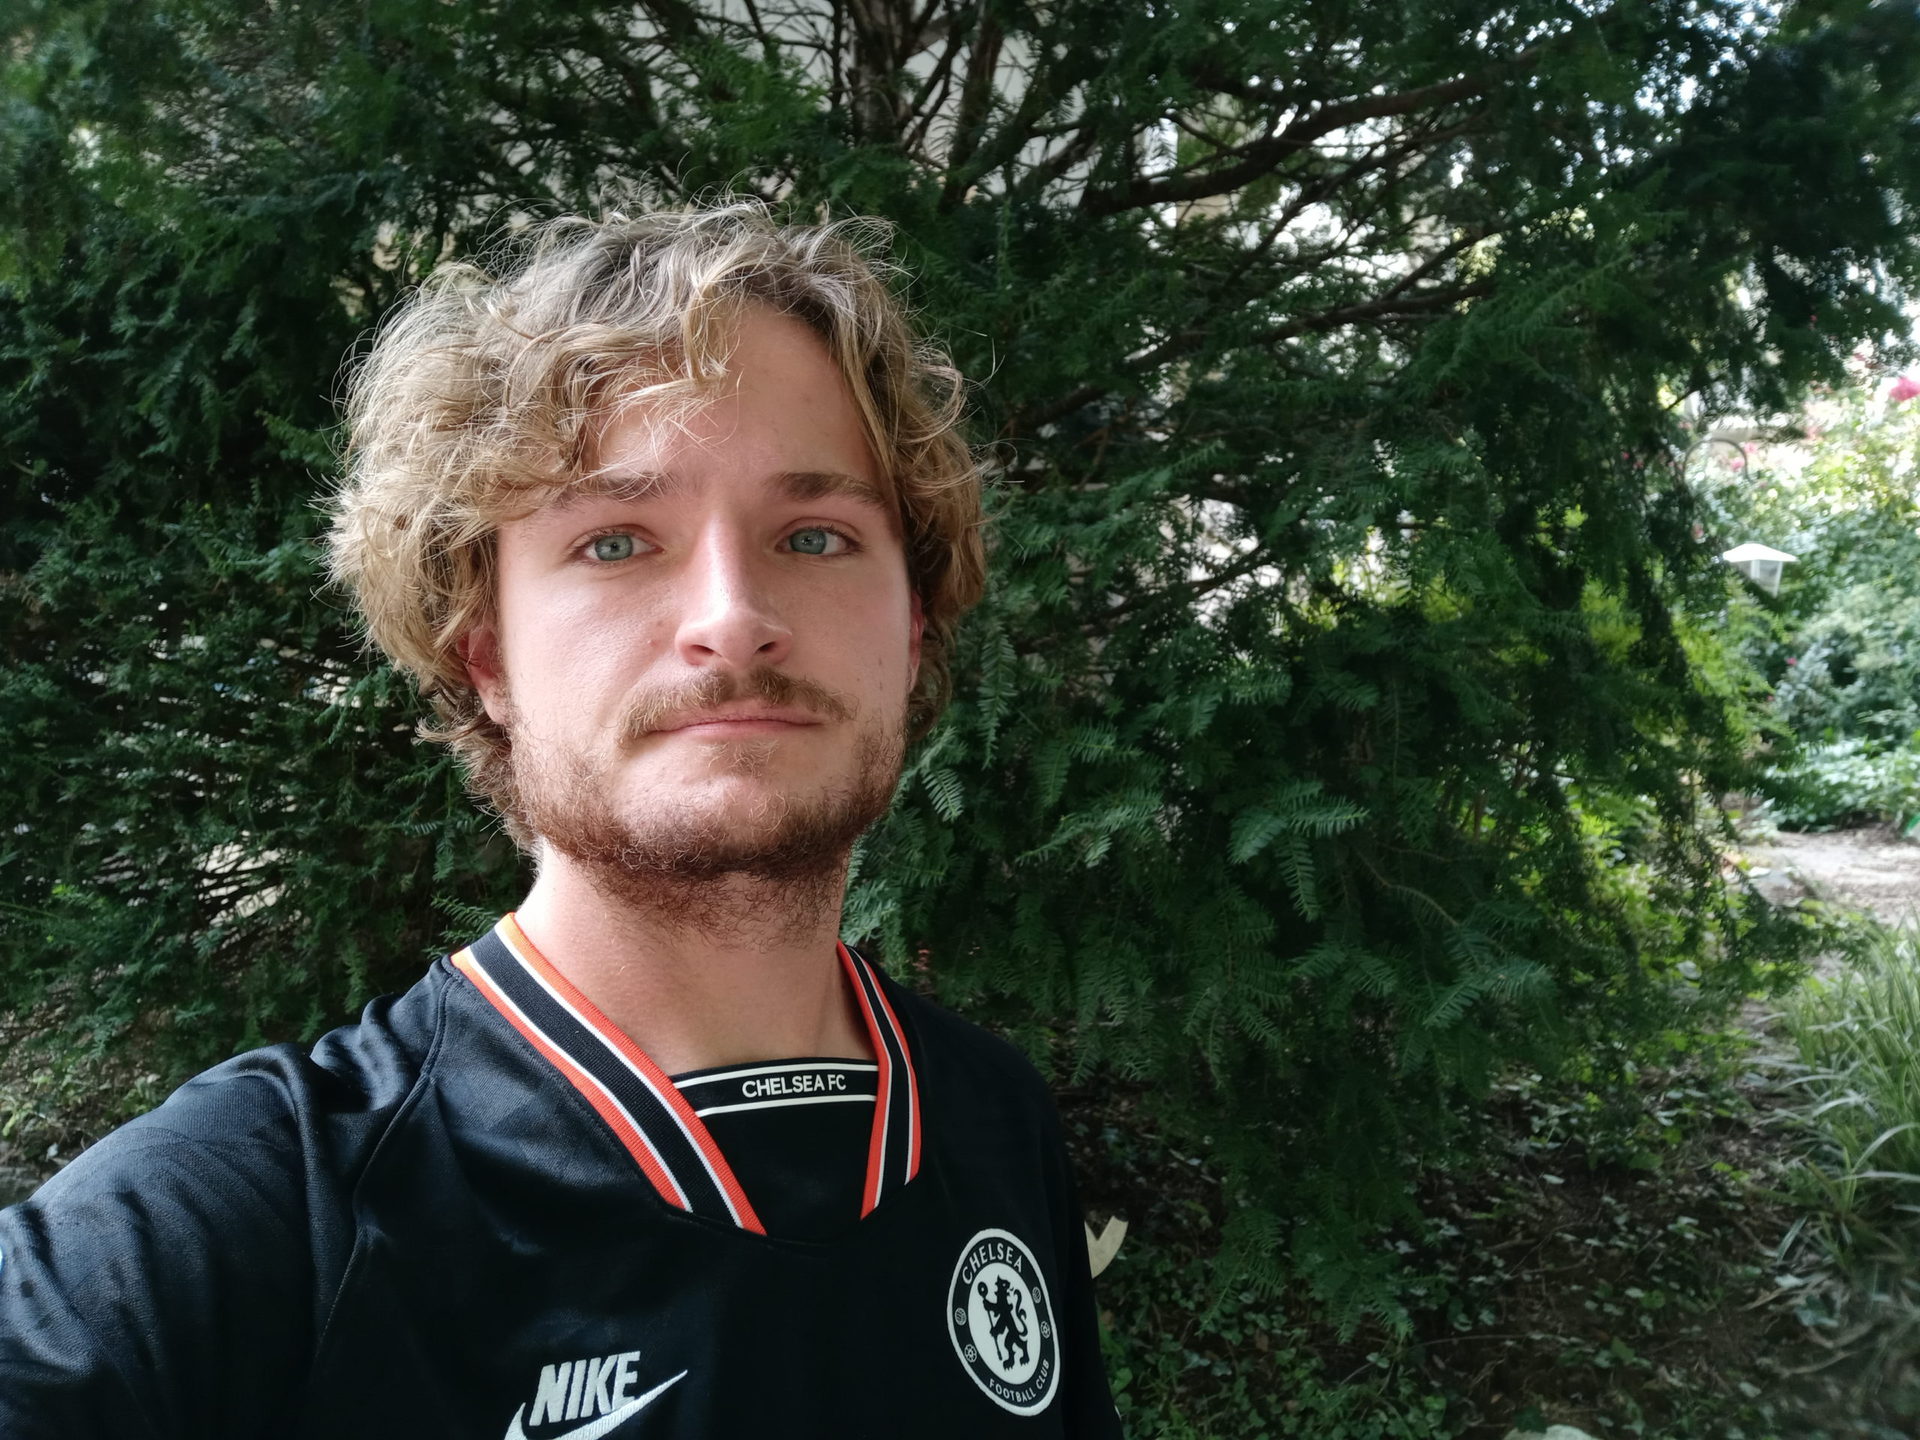 LG Stylo 6 standard selfie of a man with blonde curly hair and facial hair, wearing a dark coloured top.